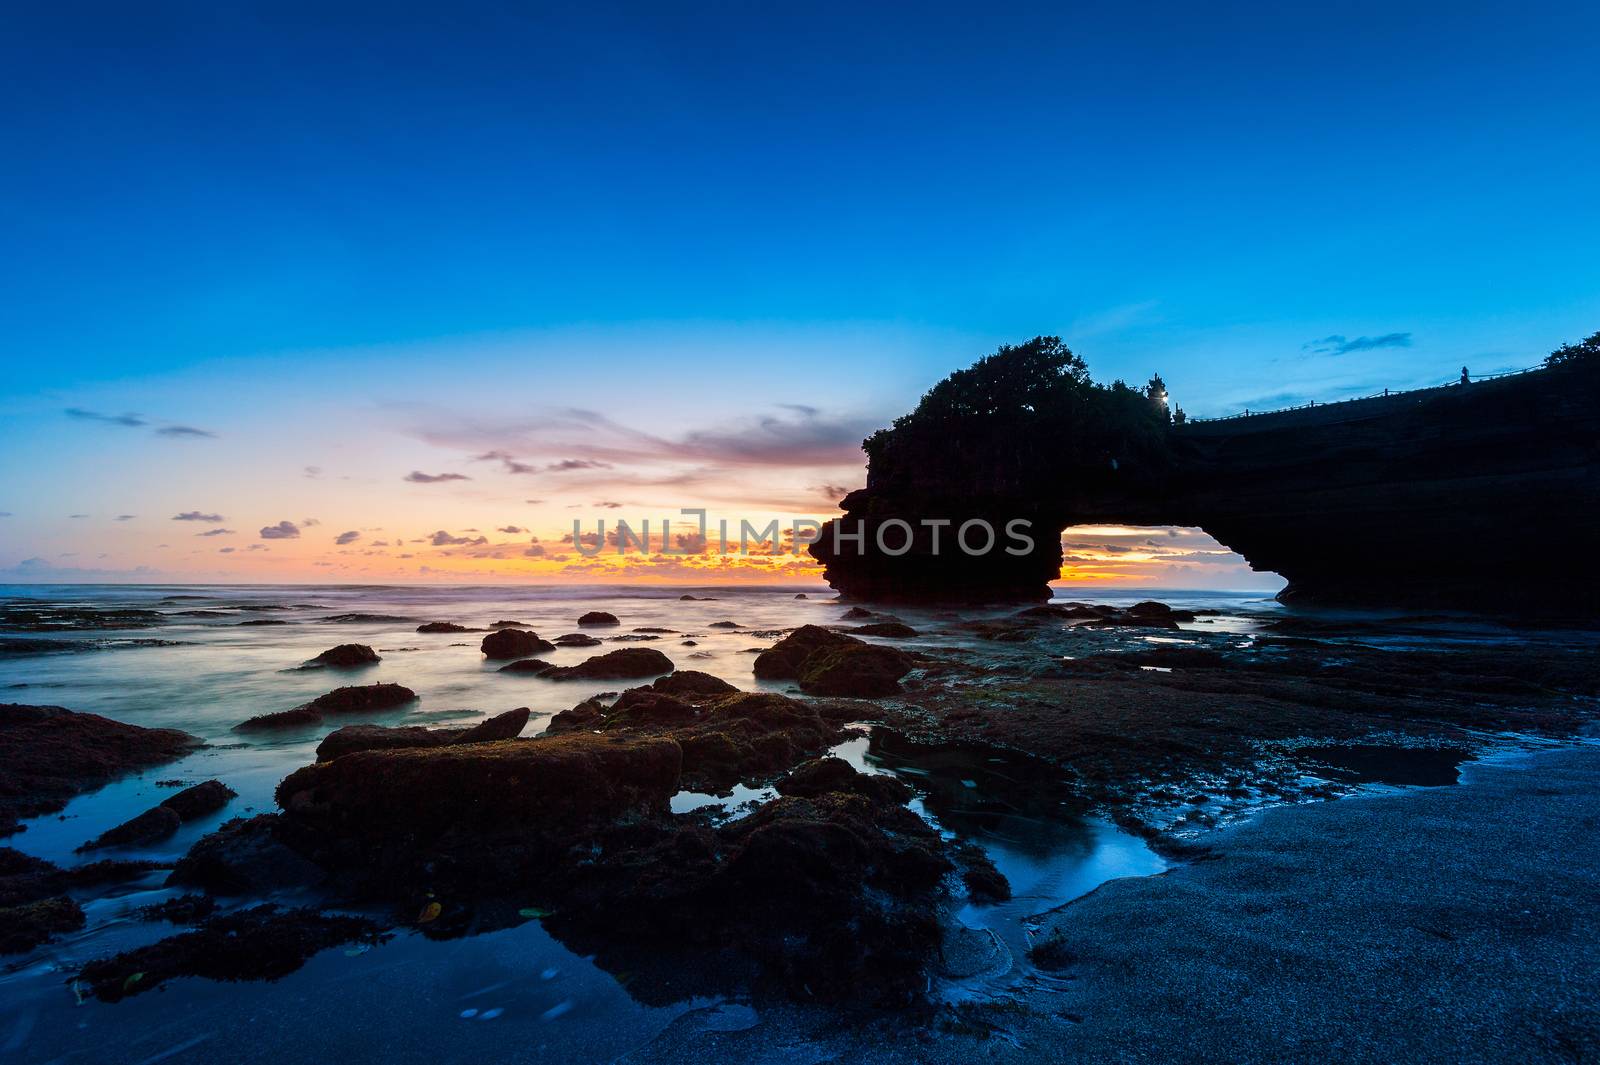 Tanah Lot Temple at sunset in Bali, Indonesia.(Dark)